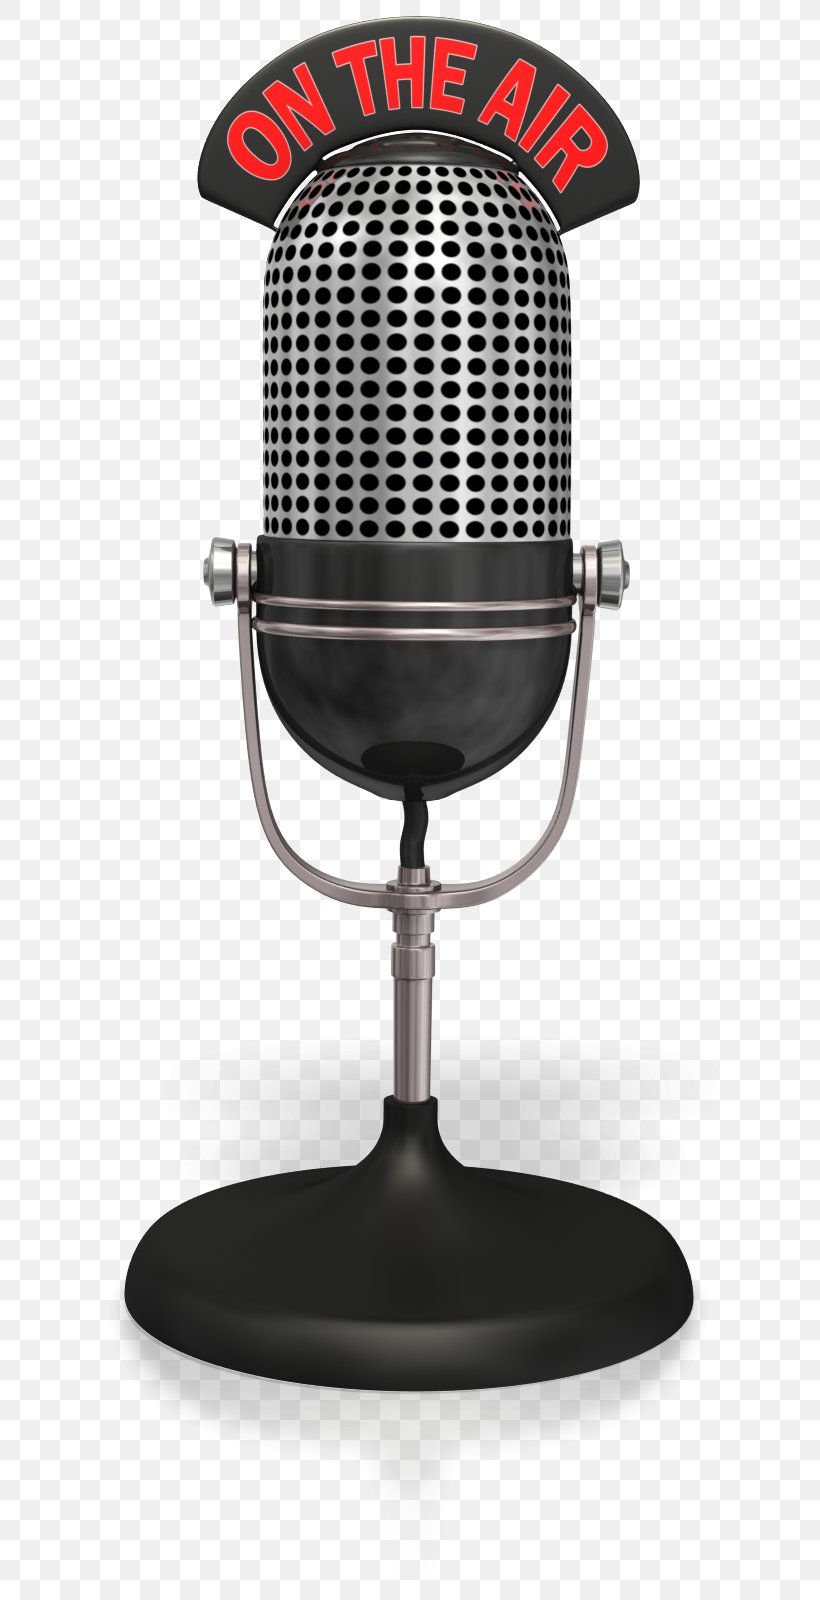 Wireless Microphone Golden Age Of Radio Clip Art, PNG, 724x1600px, Microphone, Antique Radio, Audio, Audio Equipment, Broadcasting Download Free